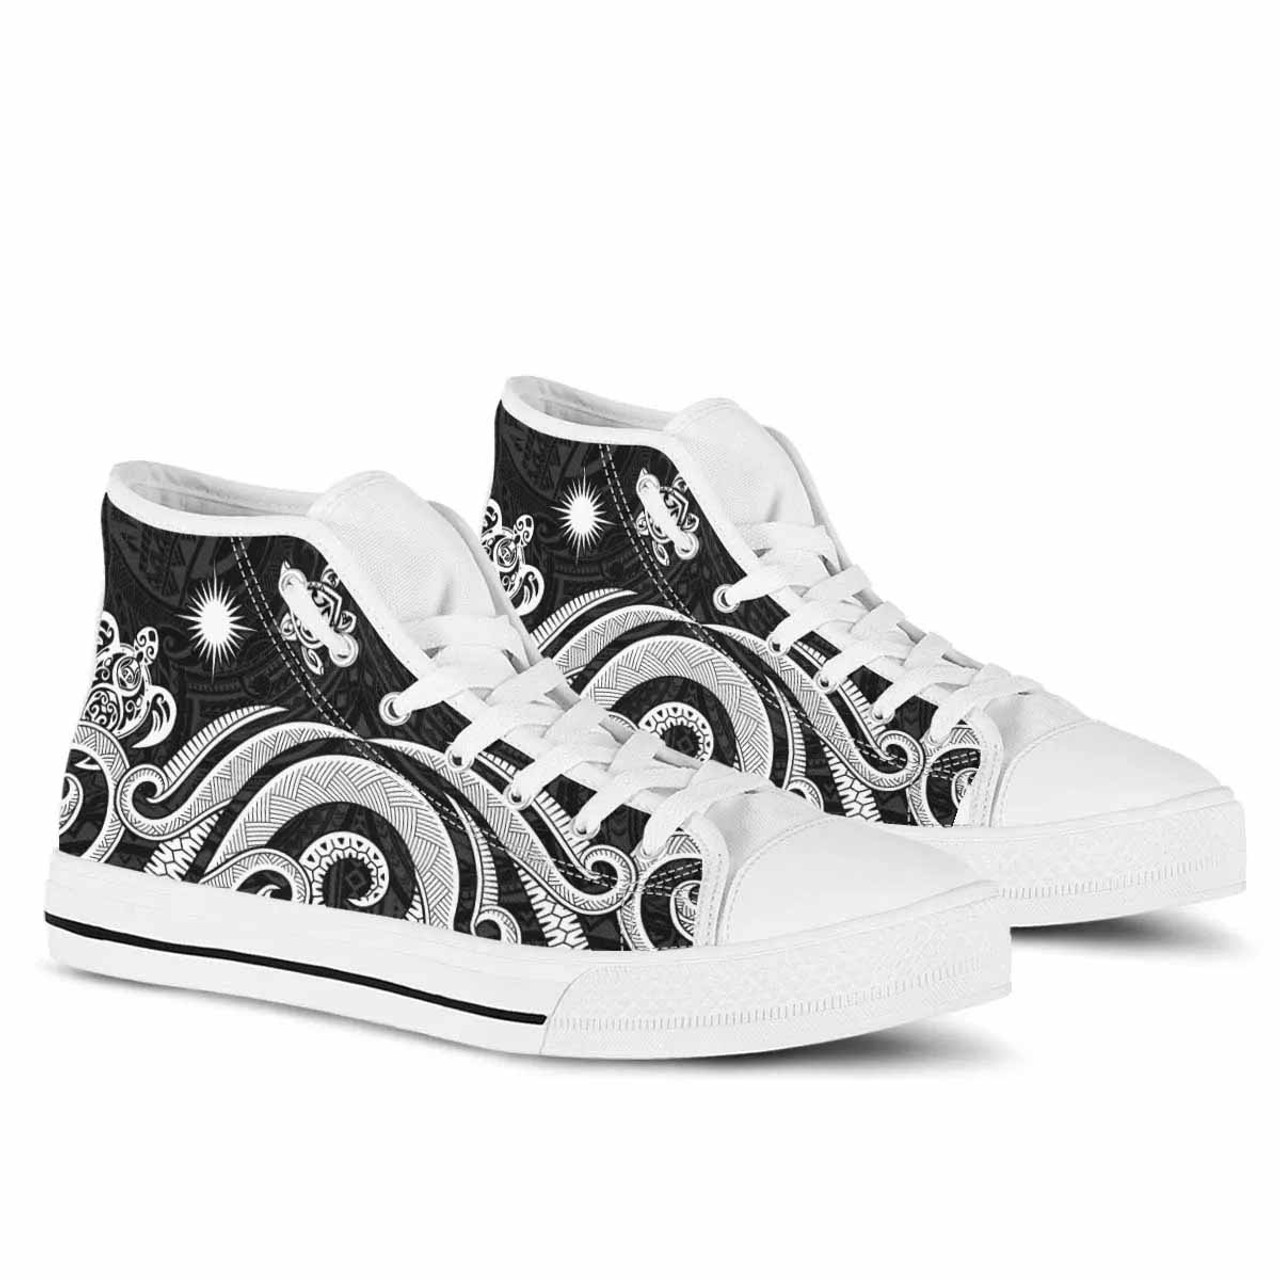 Marshall Islands High Top Shoes - White Tentacle Turtle 8